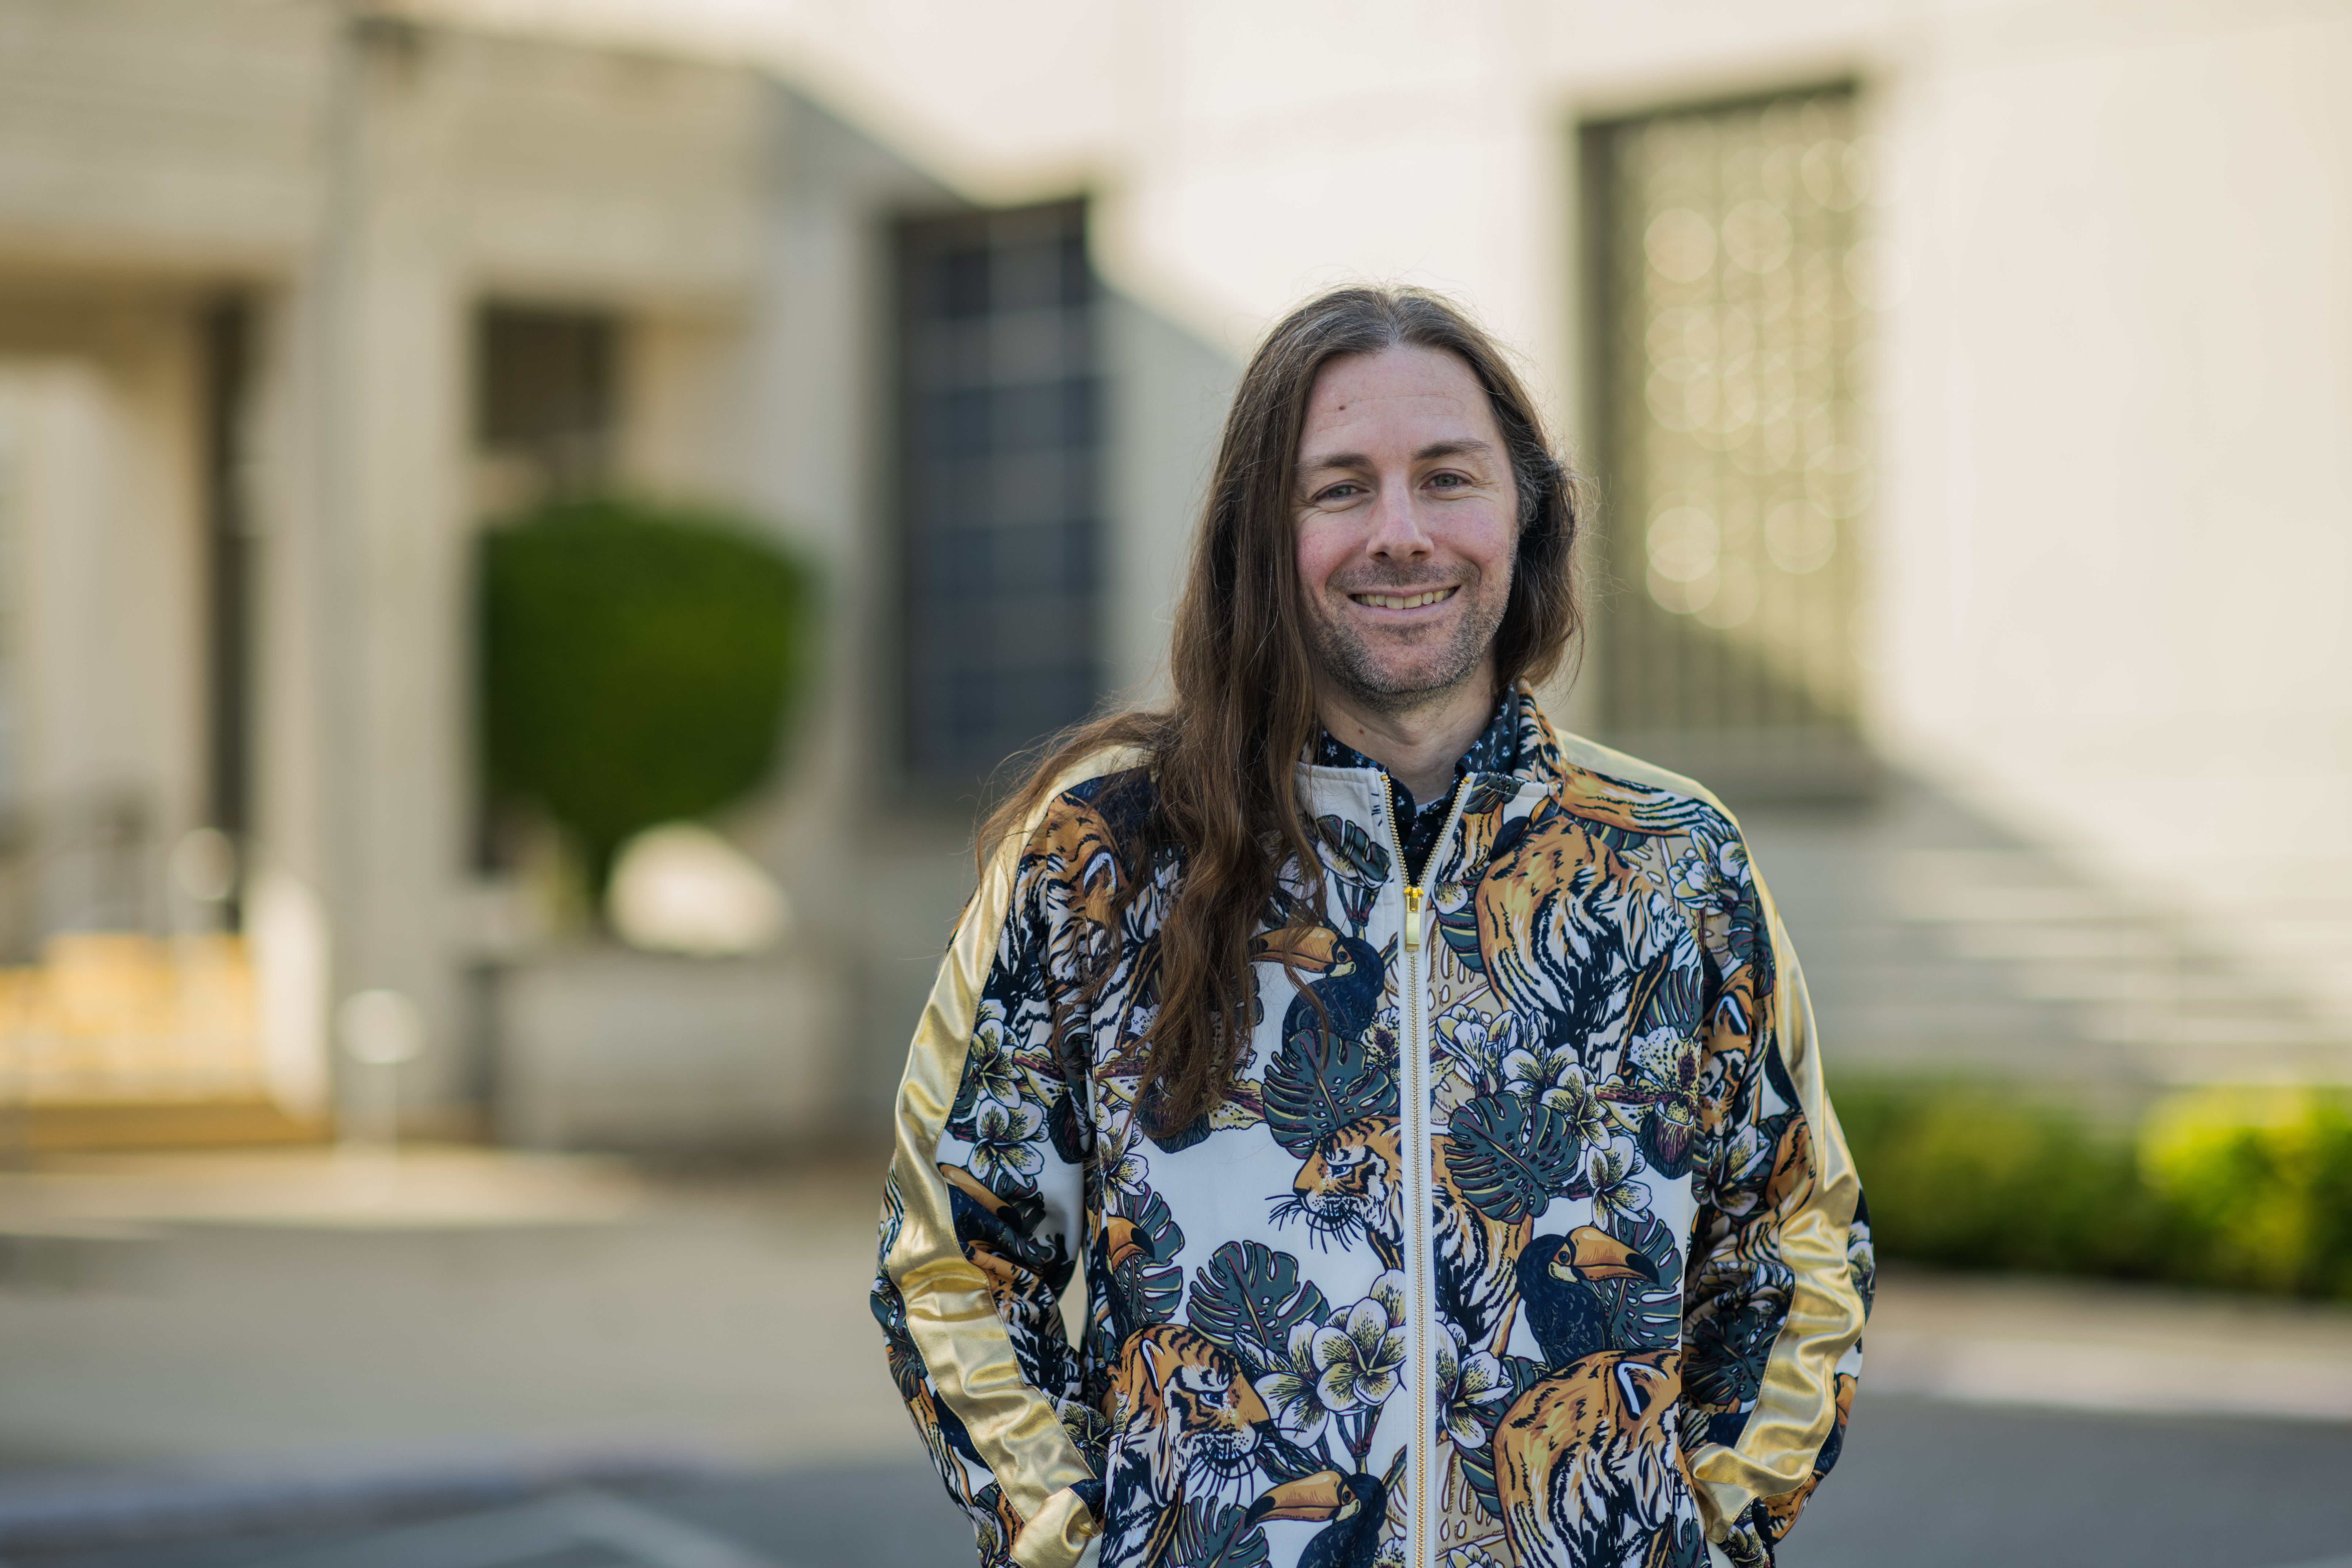 Garrett Sadler smiles softly outside in front of a marble building for his Faces of NASA portrait. His brown hair is long, past his shoulders, and he's wearing a zipped-up jacket with tropical plants, flowers, and tigers on it.